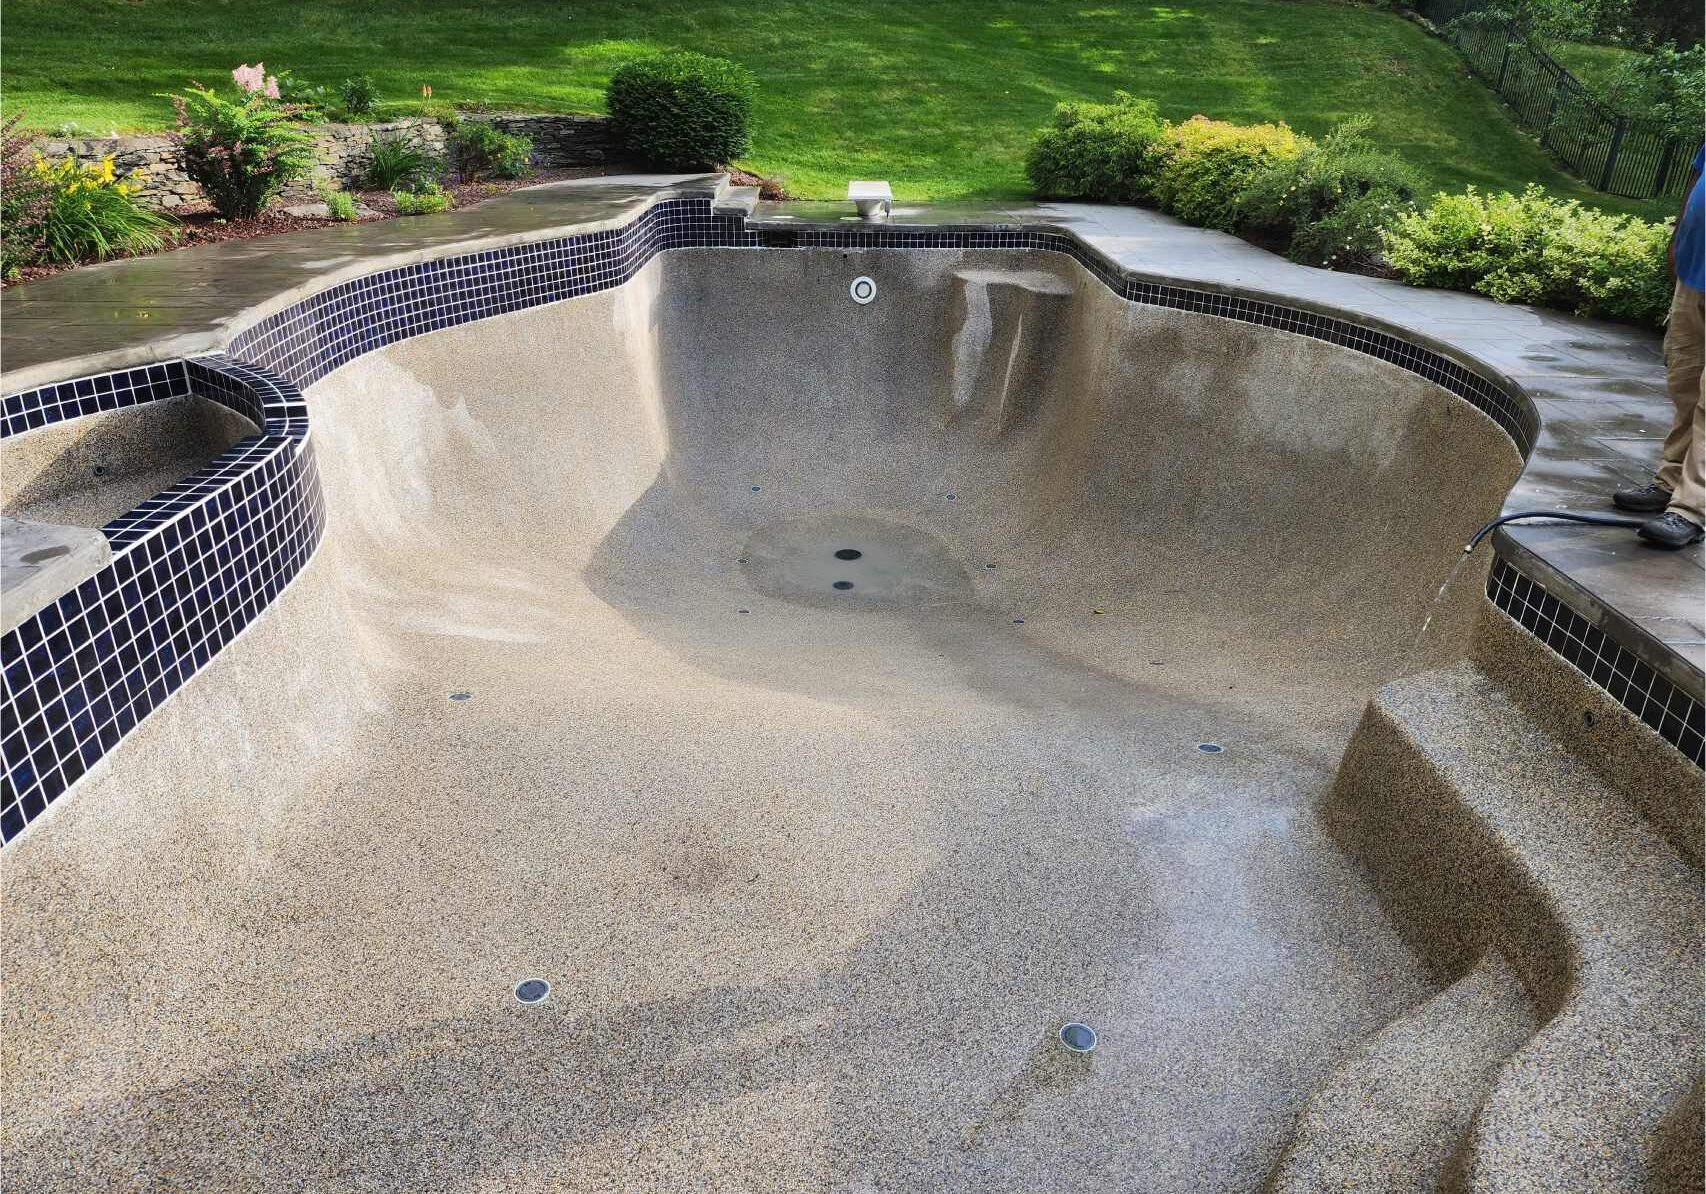 A concrete pool with a wall and bench